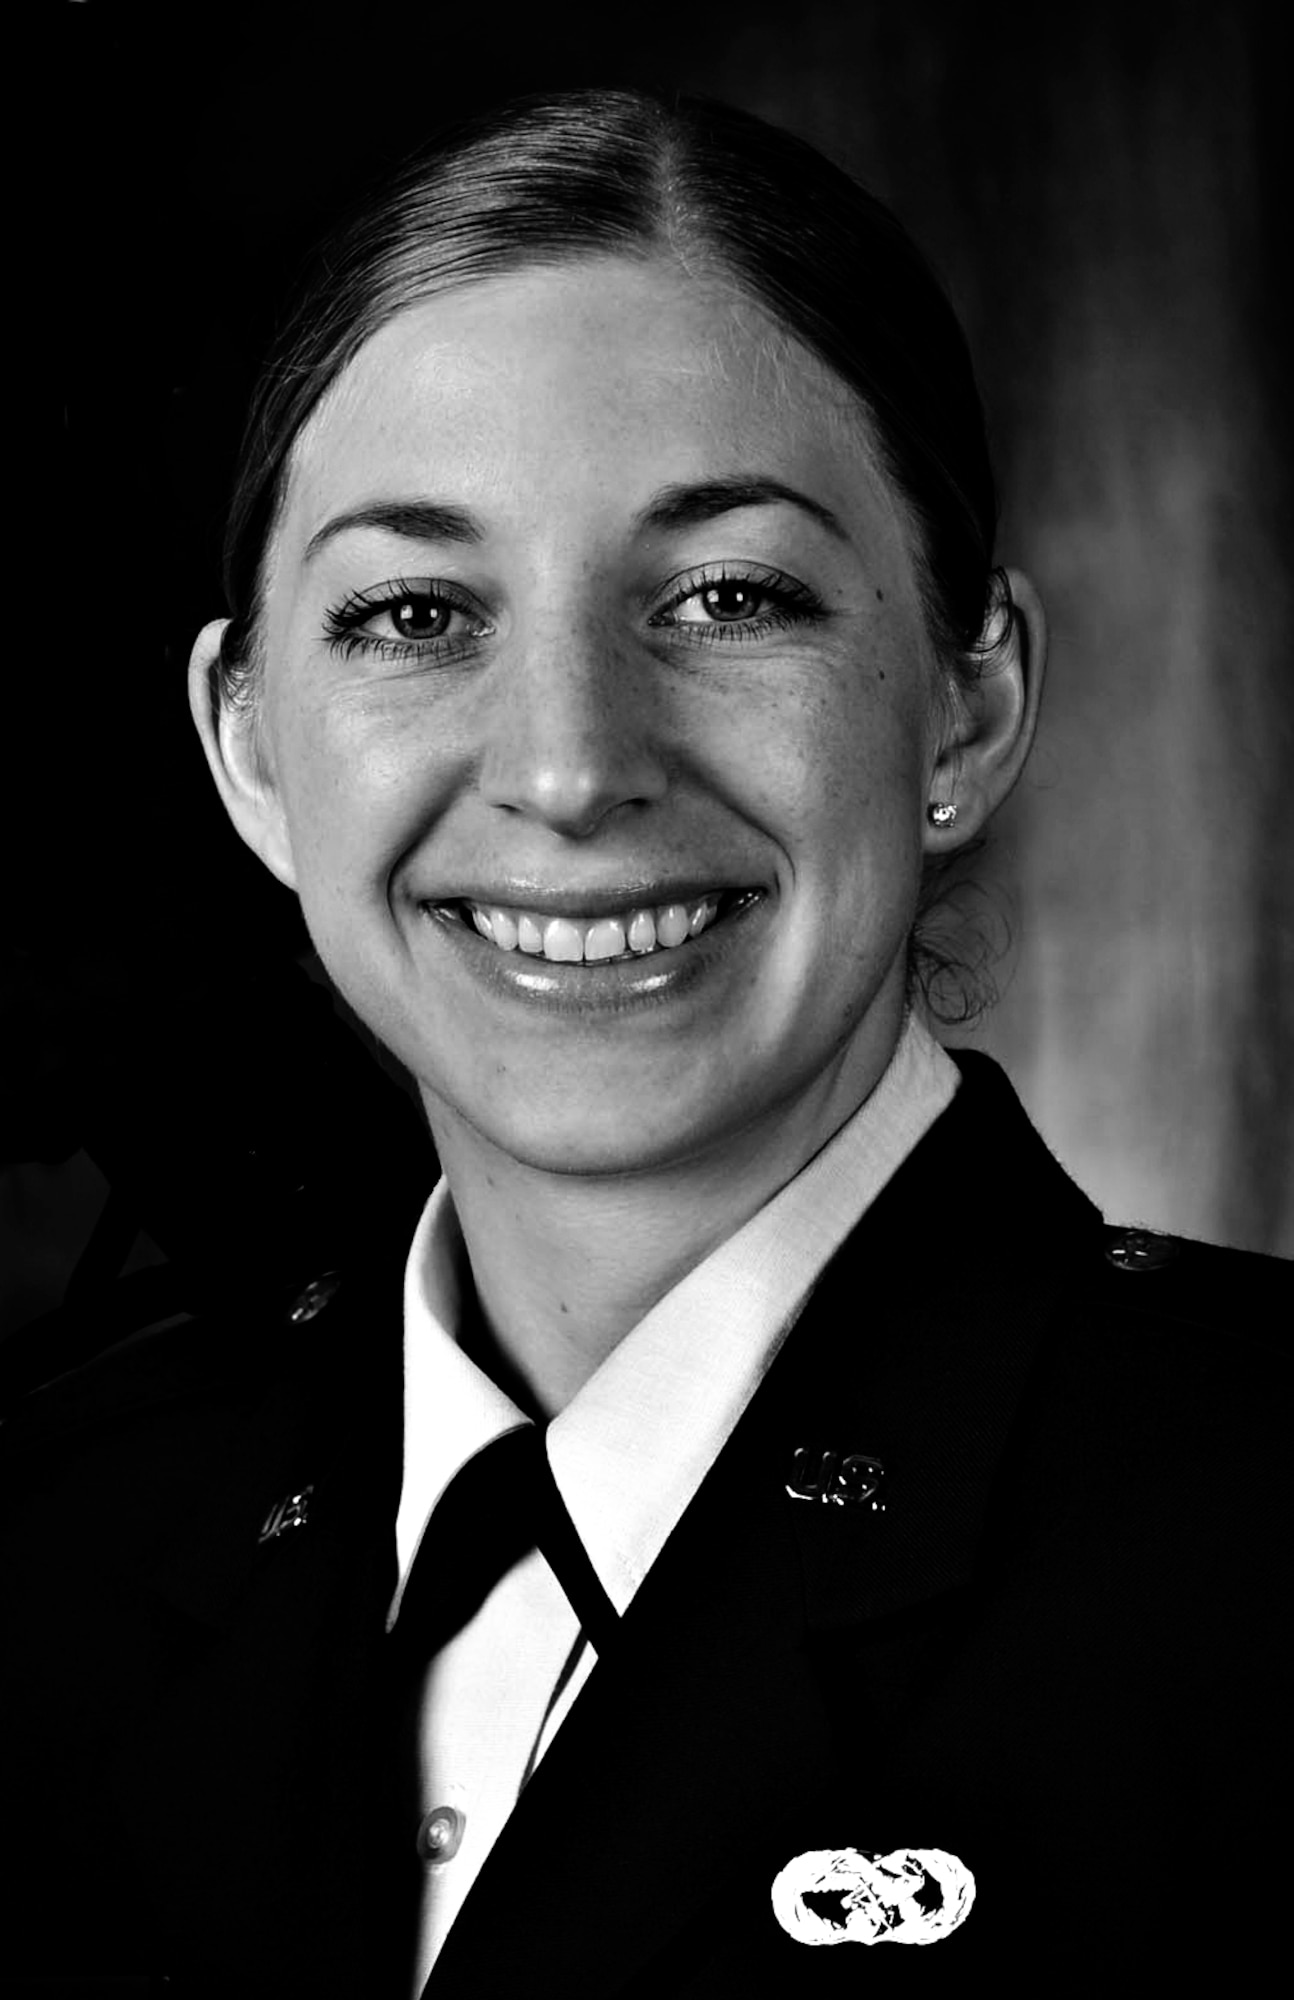 U.S. Air Force 2nd Lieutenant Keisha Pearson, poses for a photo at Langley Air Force Base, Aug. 28, 2013. Pearson was in high school during the Sept. 11 attacks and vividly recalls how the events impacted her life. (U.S. Air Force photo illustration by Staff Sgt. Jarad A. Denton/Released)  